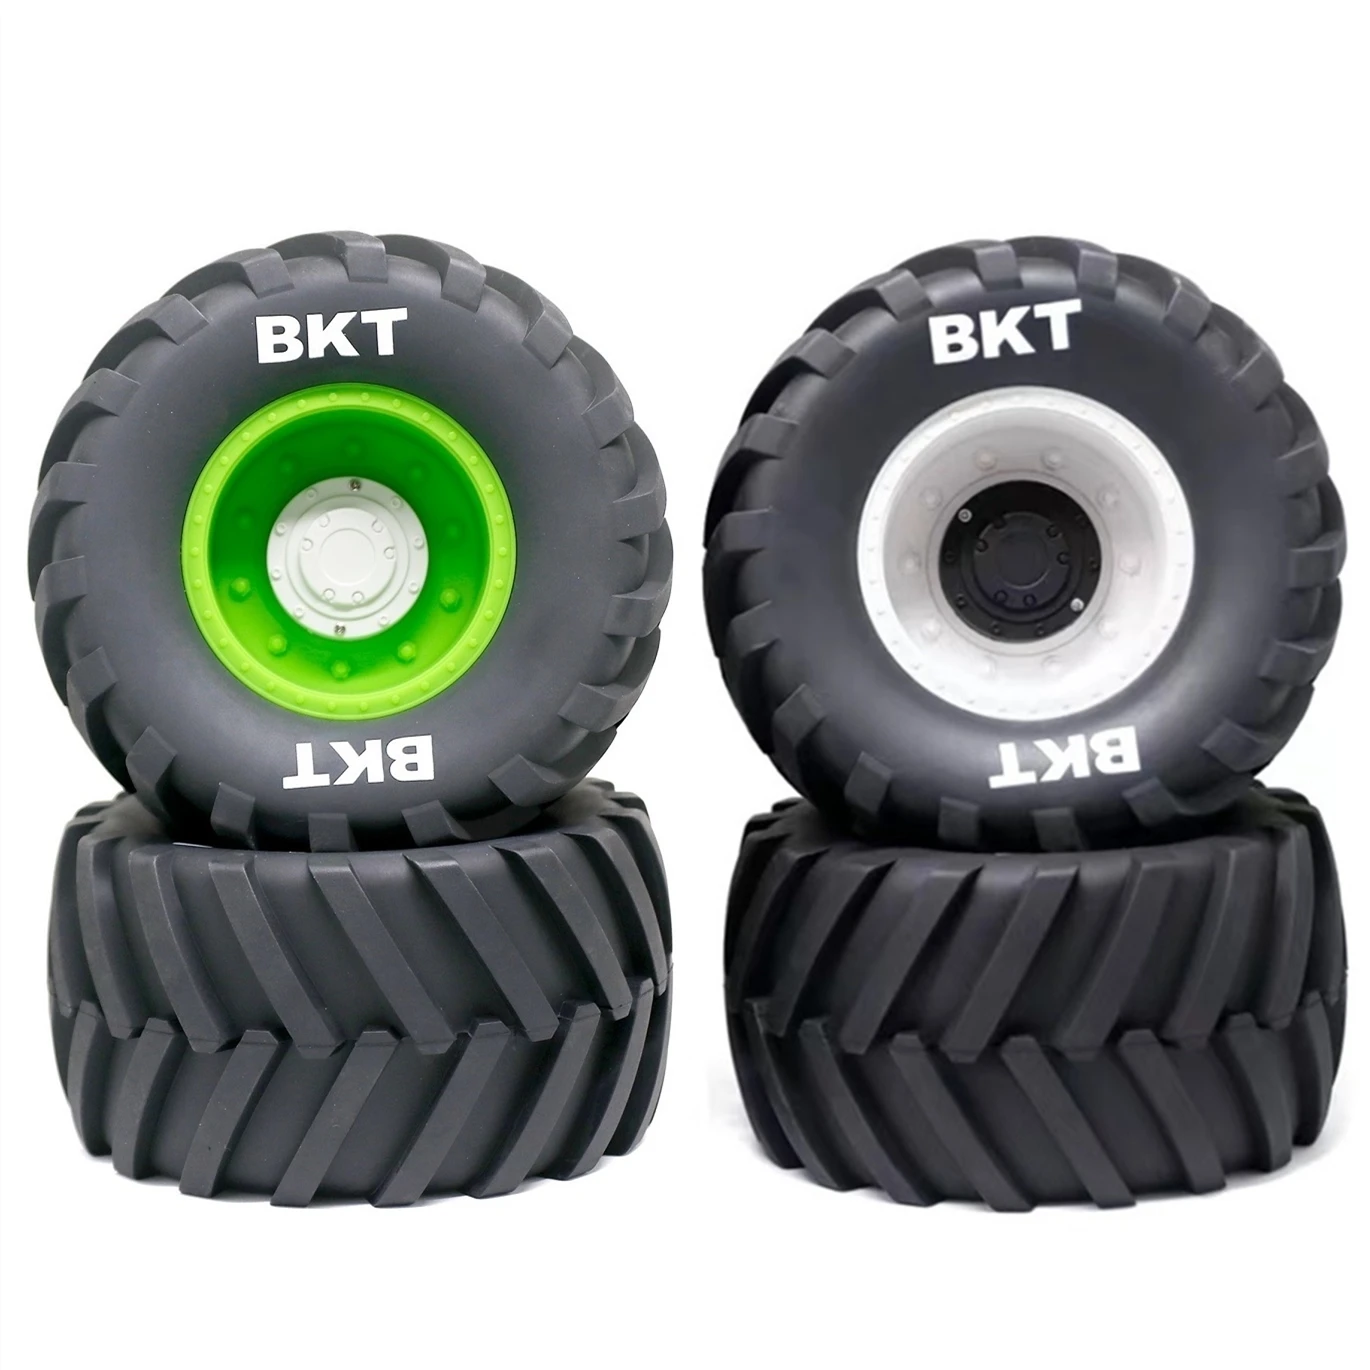 

2pcs 1/8 Buggy Tires 173mm Wheel 17mm Hex for Losi LMT Arrma Kraton Traxxas Maxx E-Revo Kyosho USA-1 Monster Truck Upgrade Parts